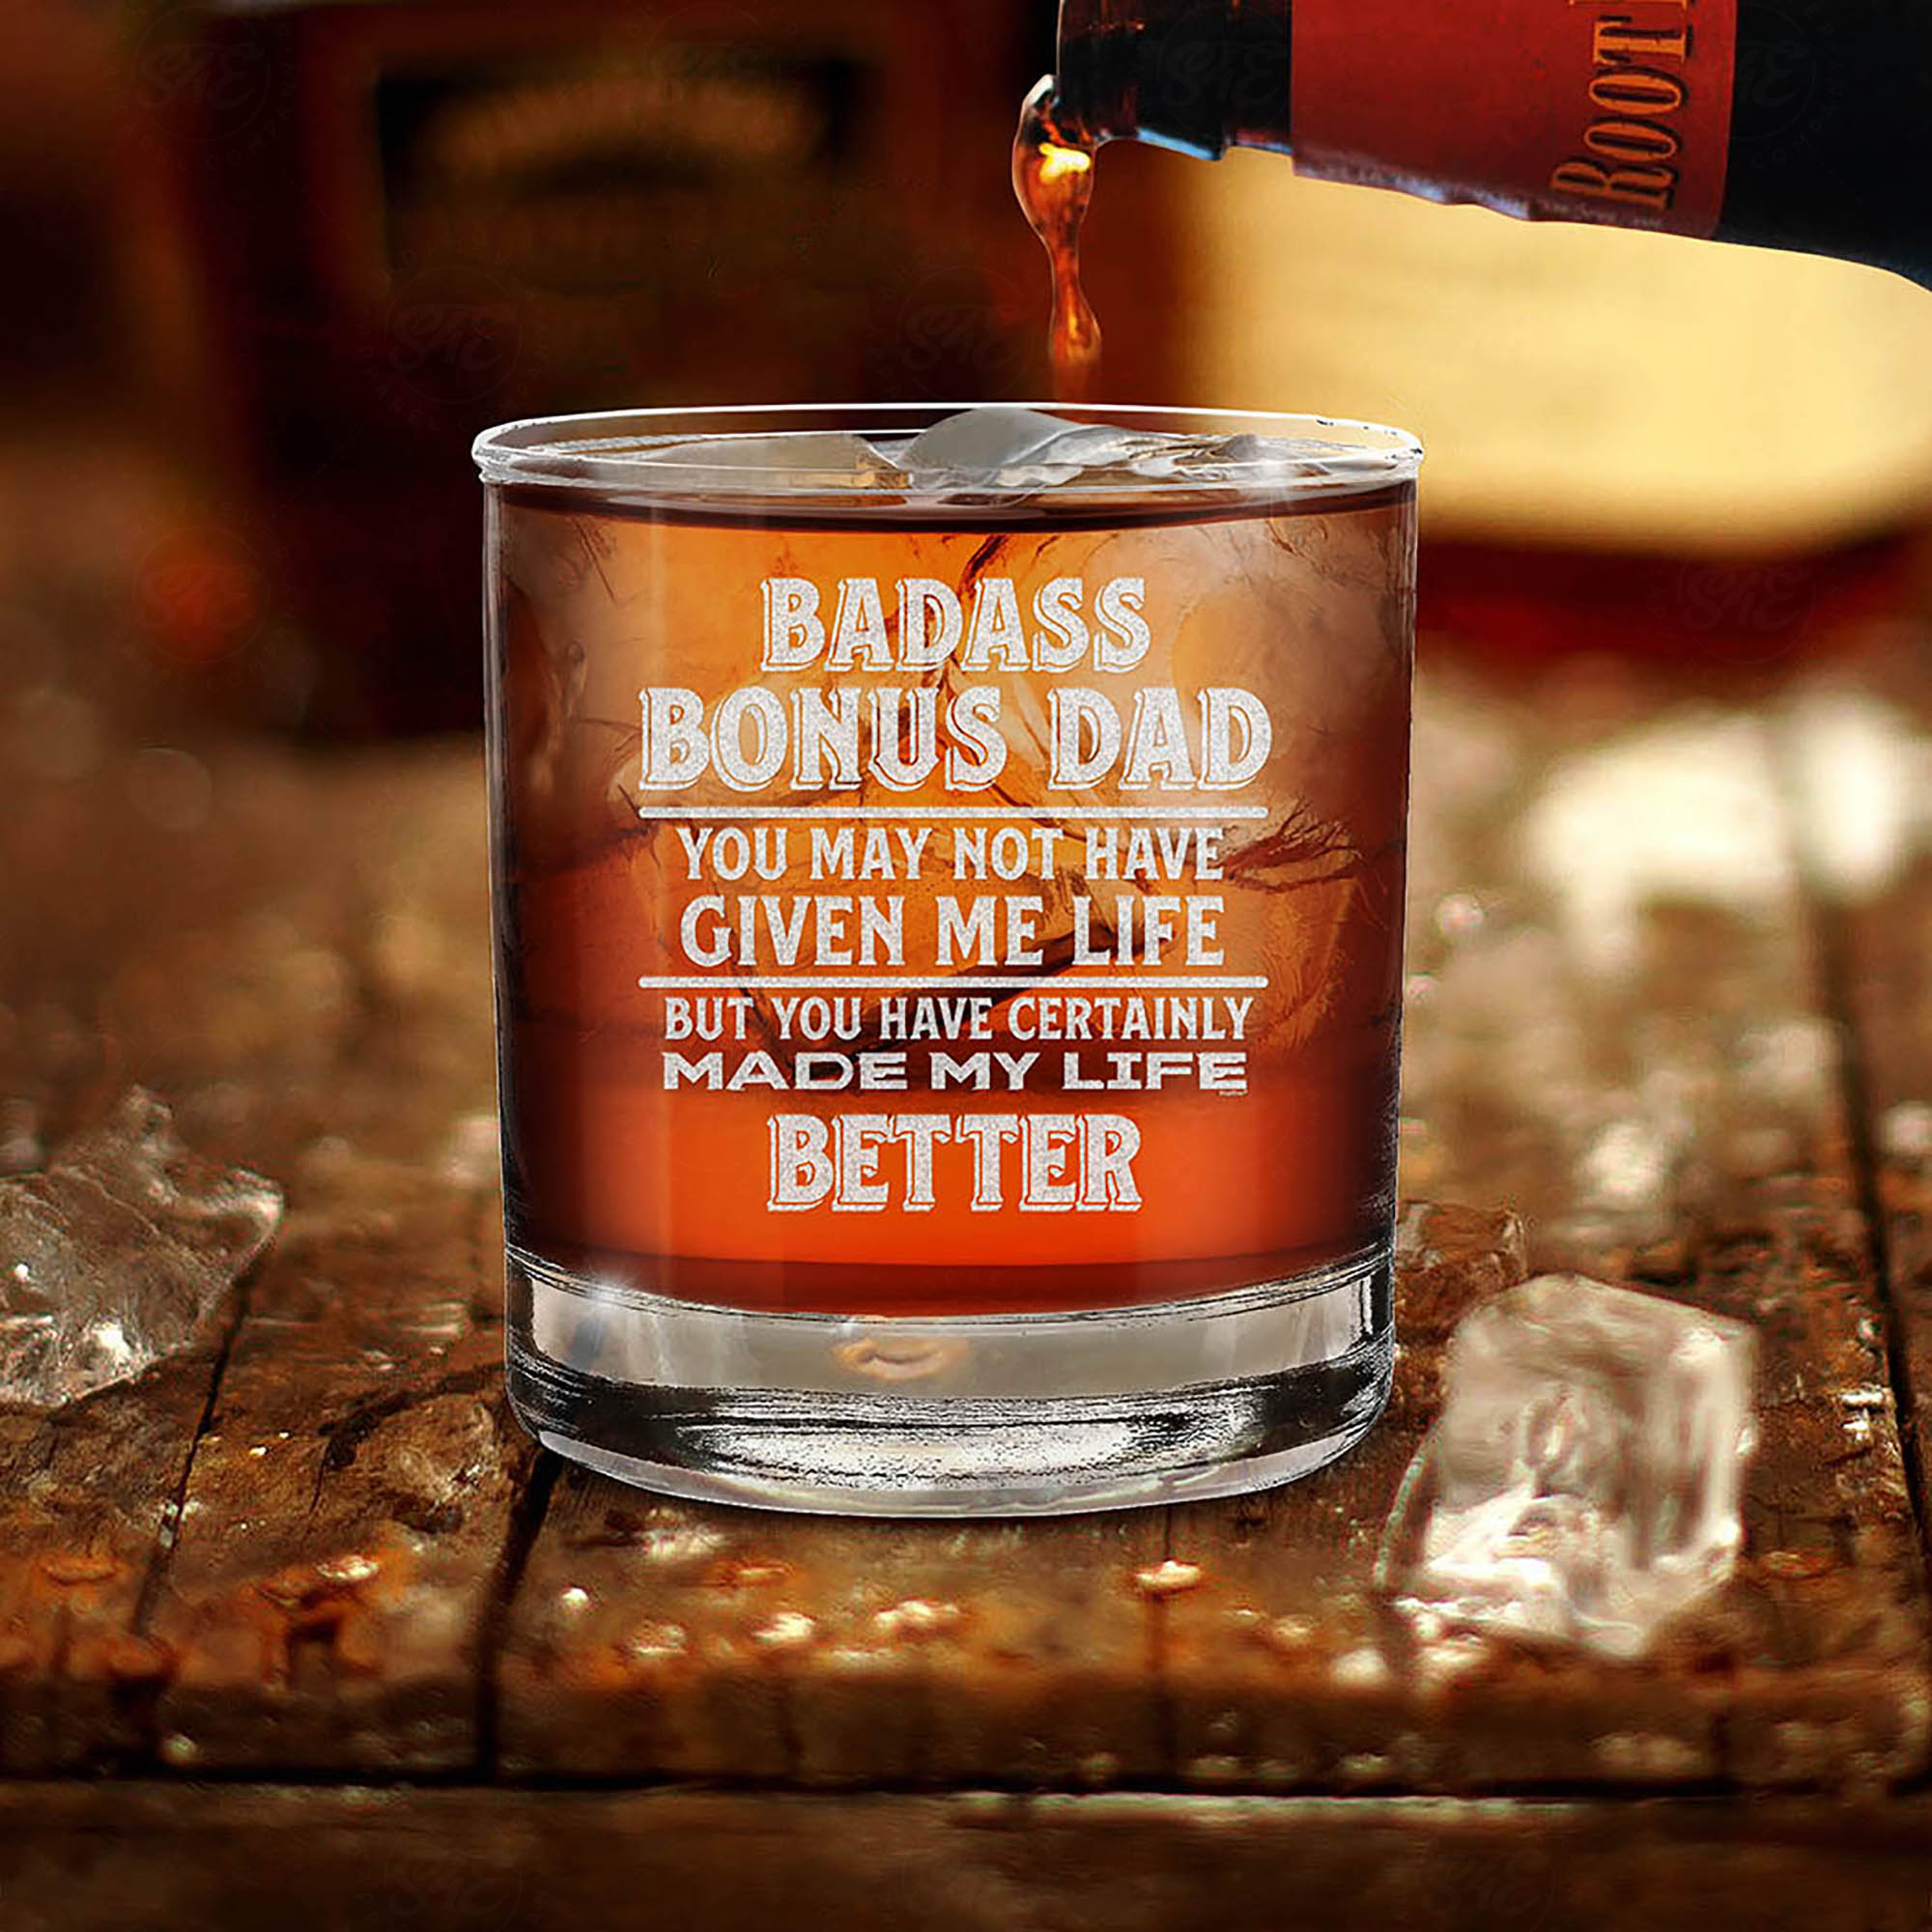 Bonus Dad You May Not Have Given Me Life But You Certainly Made My Life Better Engraved Whiskey Glass Father's Day Gift for Stepdad